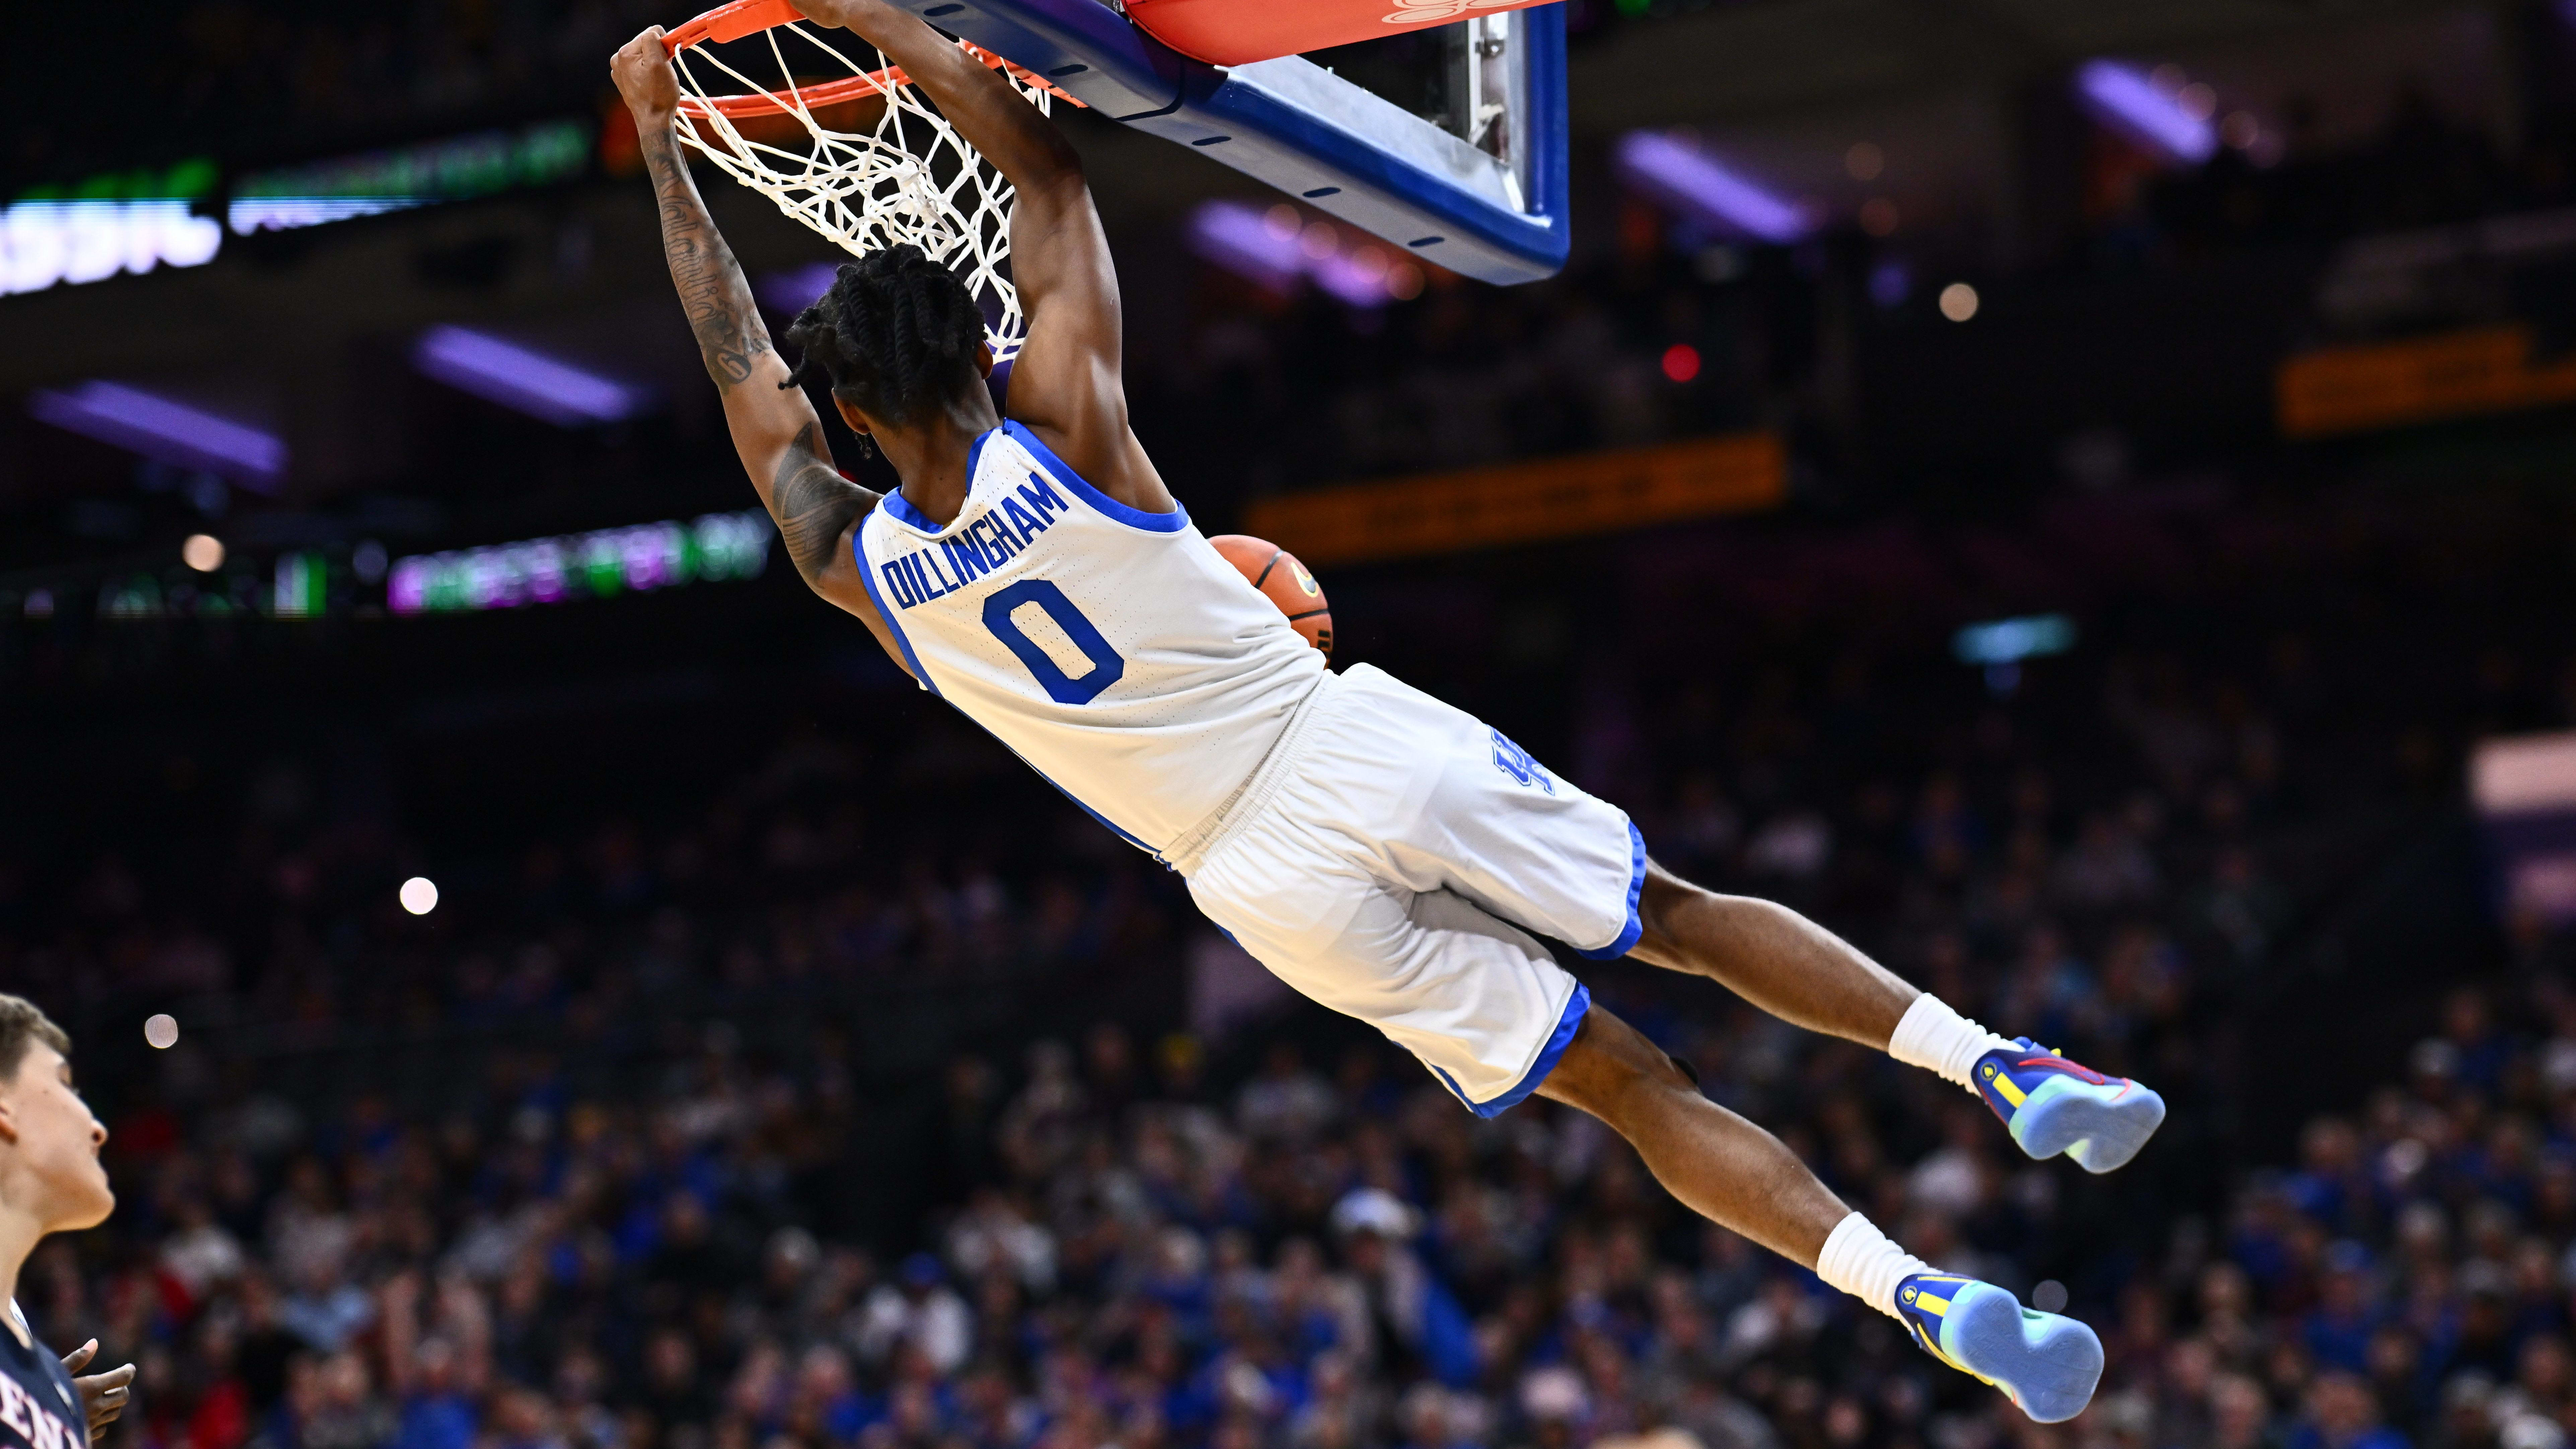 Kentucky Wildcats guard Rob Dillingham dunks during a game.